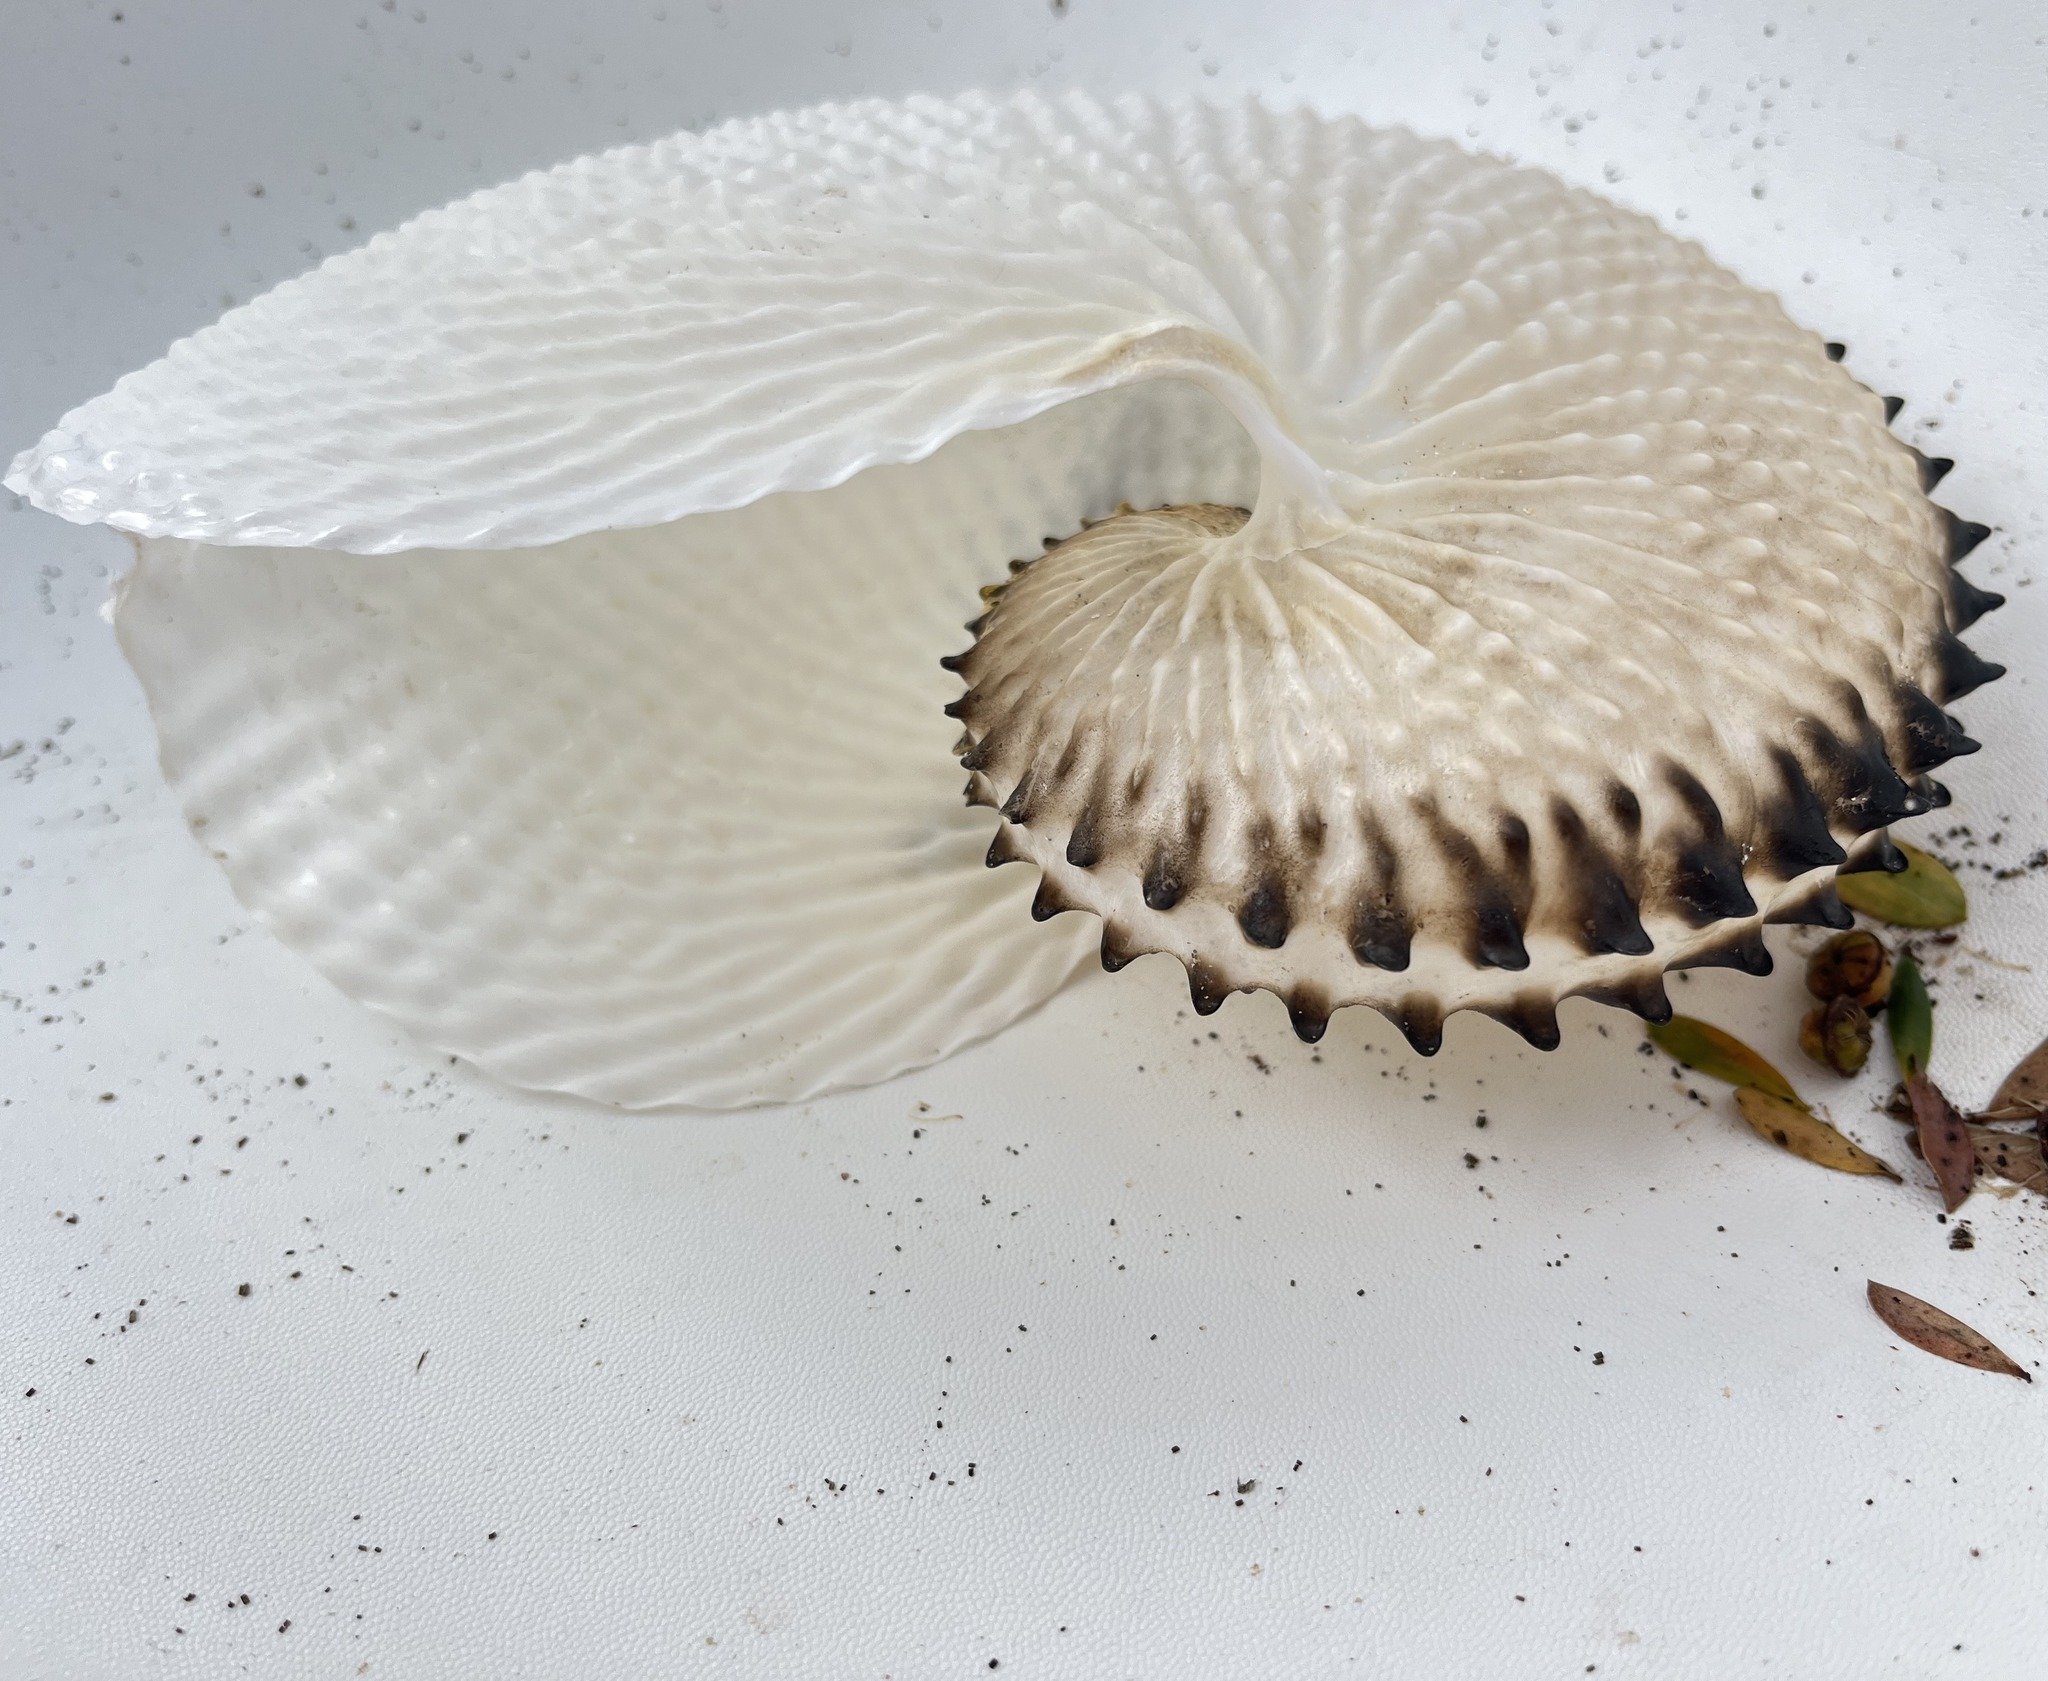 This exquisite Paper Nautilus was found recently on the spit by a very lucky local.  It is actually the shell, or eggcase, of a female Argonaut octopus.